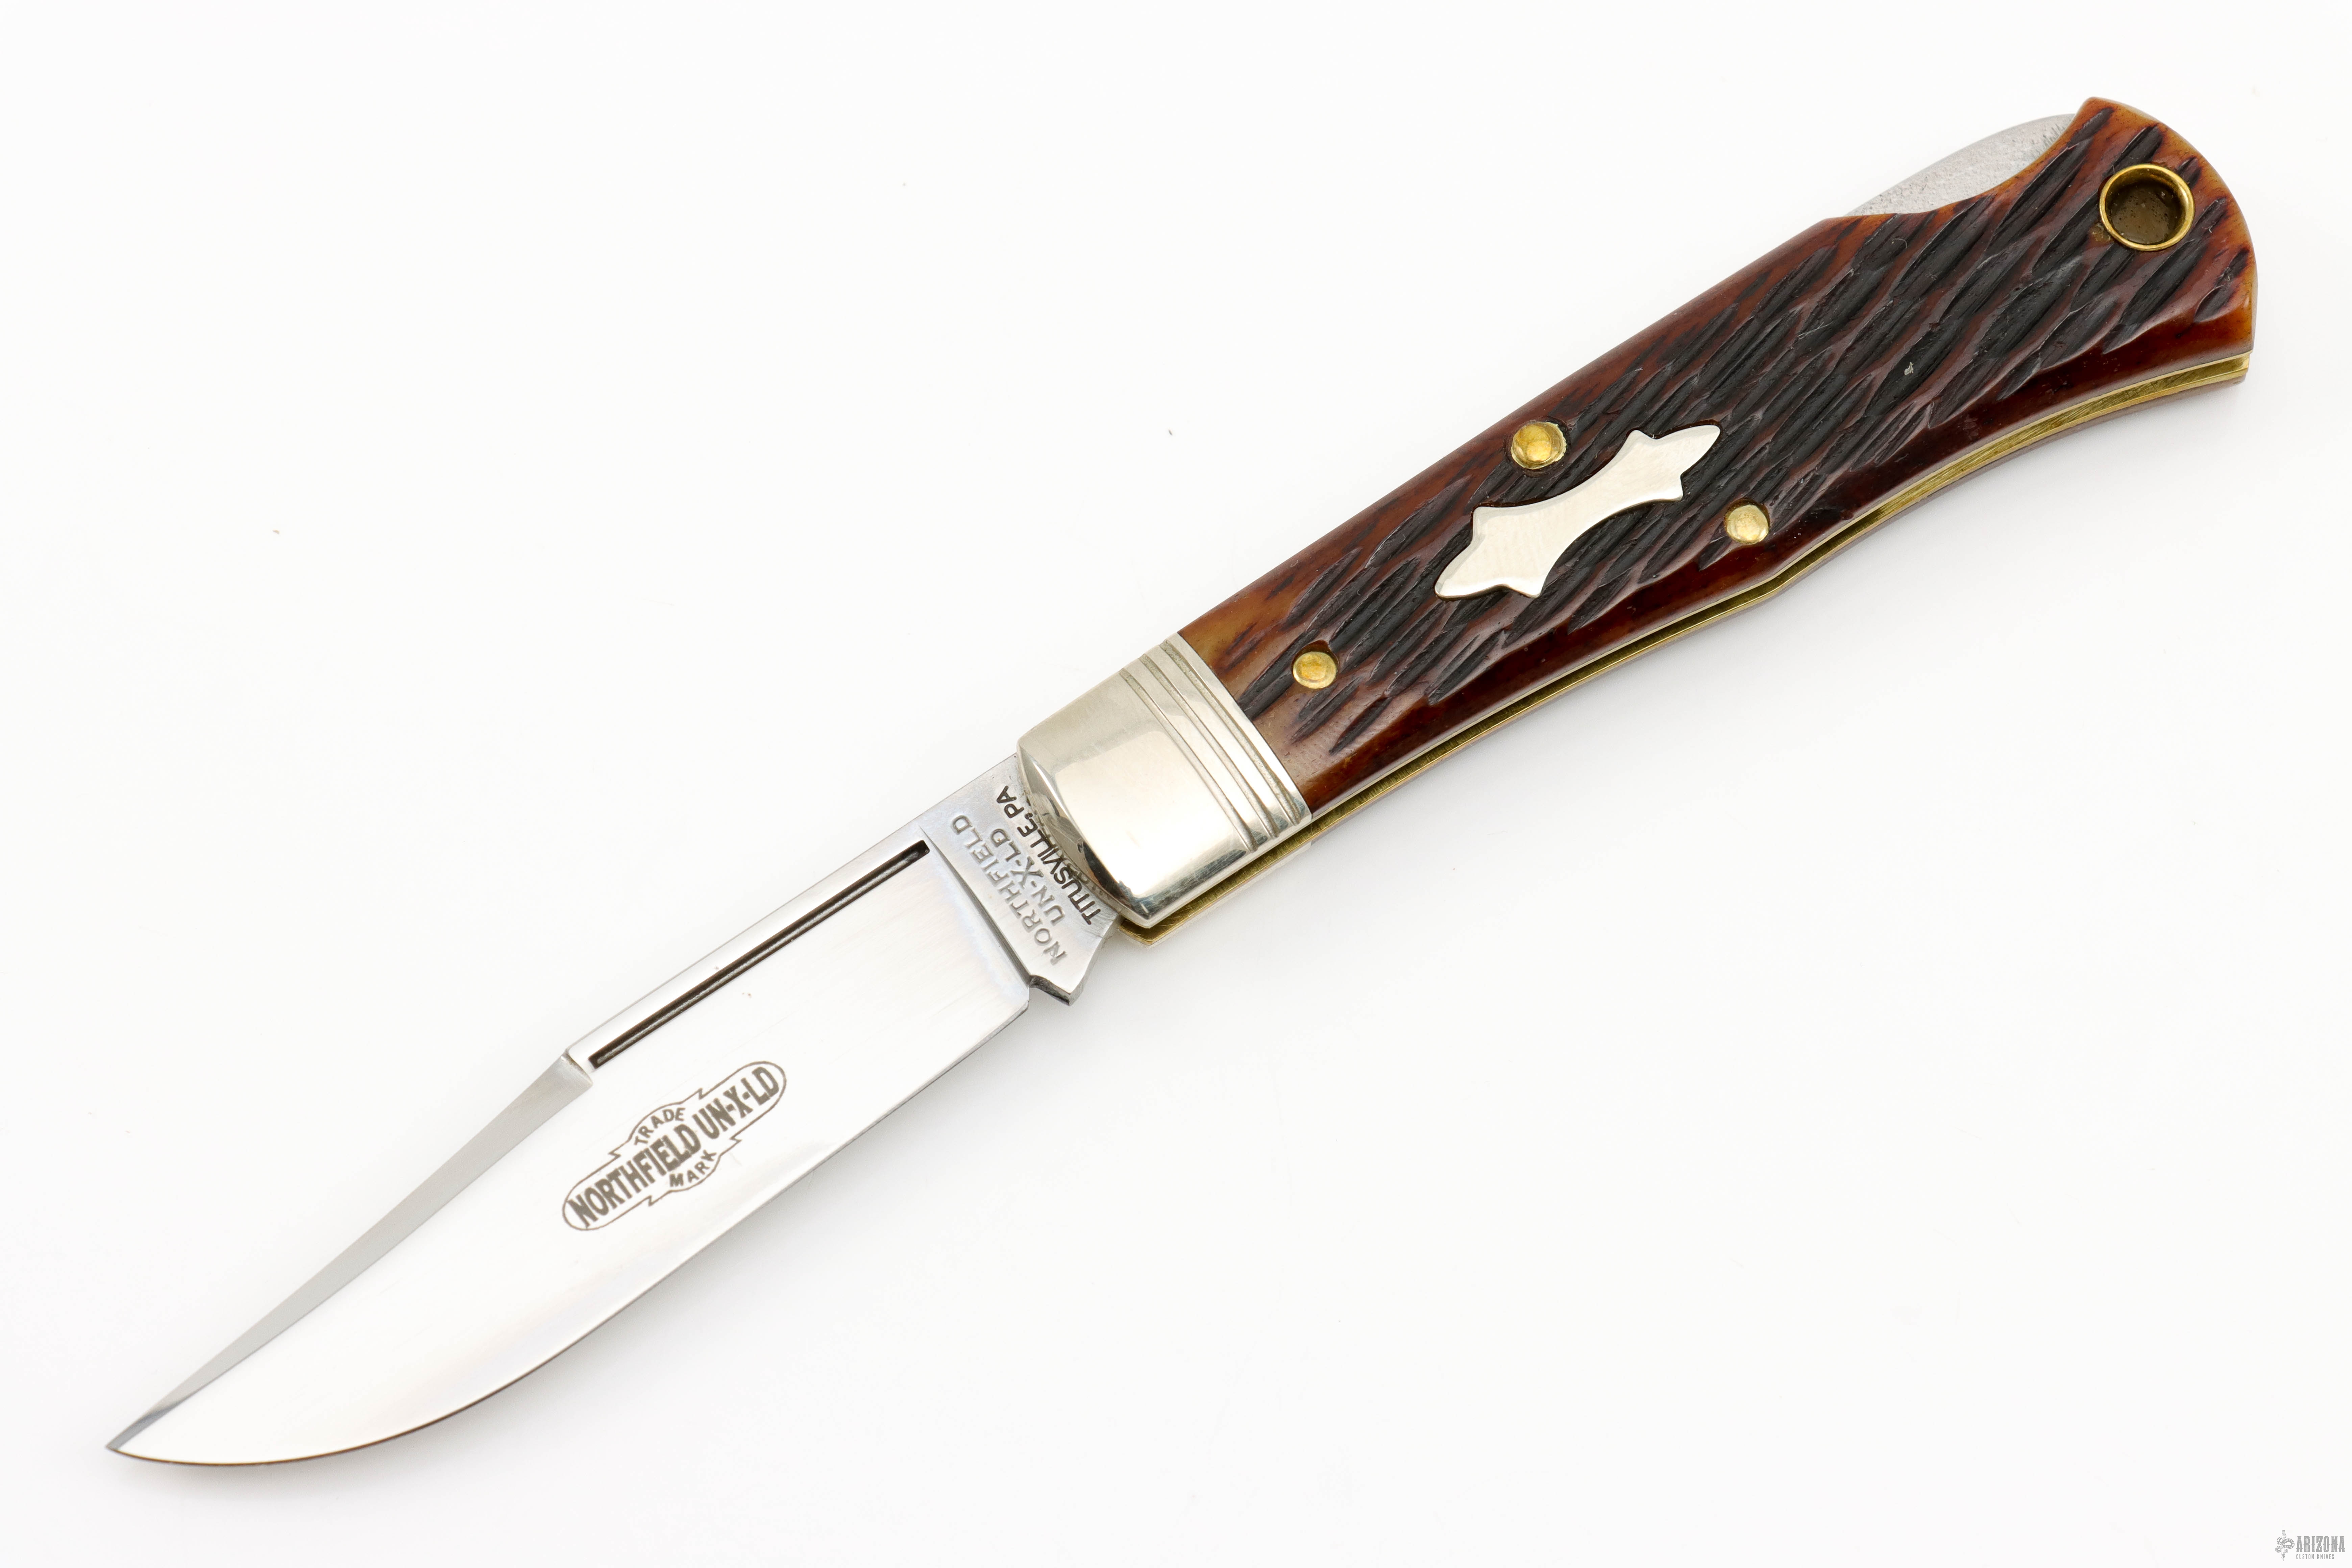 Buck Knives on X: 𝐓𝐡𝐞 𝐍𝐨𝐯𝐞𝐦𝐛𝐞𝐫 𝐁𝐮𝐜𝐤 𝐨𝐟 𝐭𝐡𝐞 𝐌𝐨𝐧𝐭𝐡  𝐢𝐬 𝐡𝐞𝐫𝐞! This exclusive Buck model 947 Breaking Knife features a  satin finished 12C27M Sandvik steel cimeter blade, and 